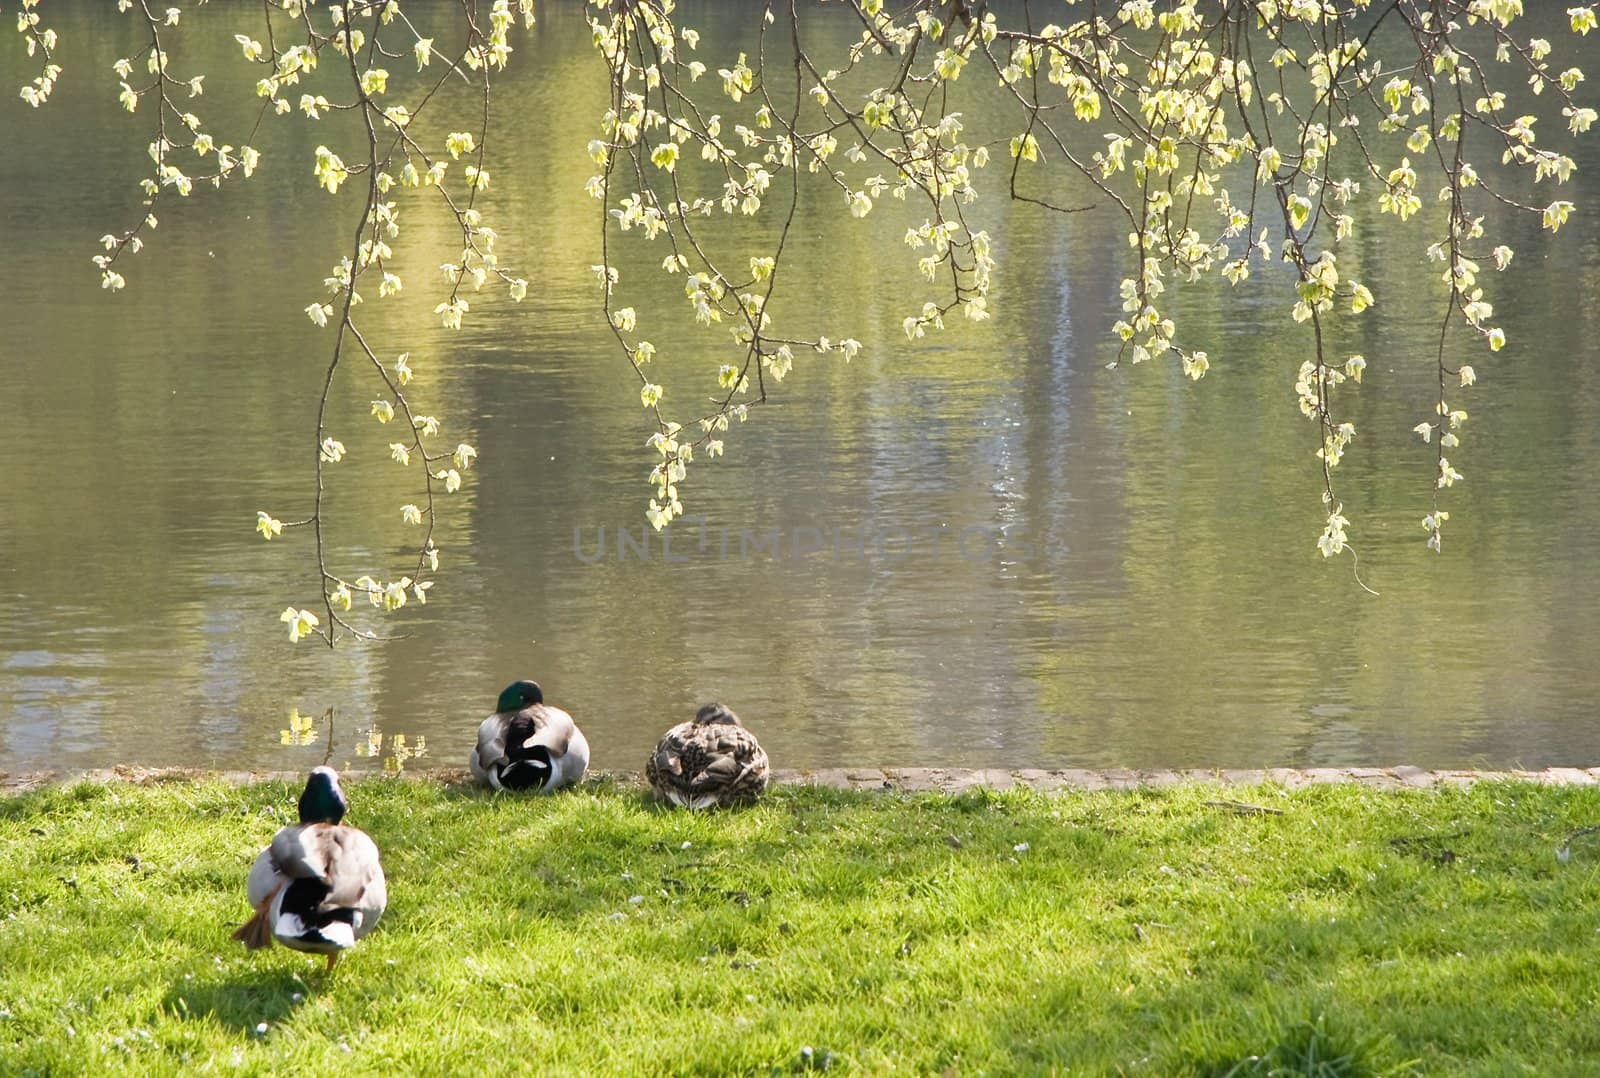 Three ducks in spring by Colette